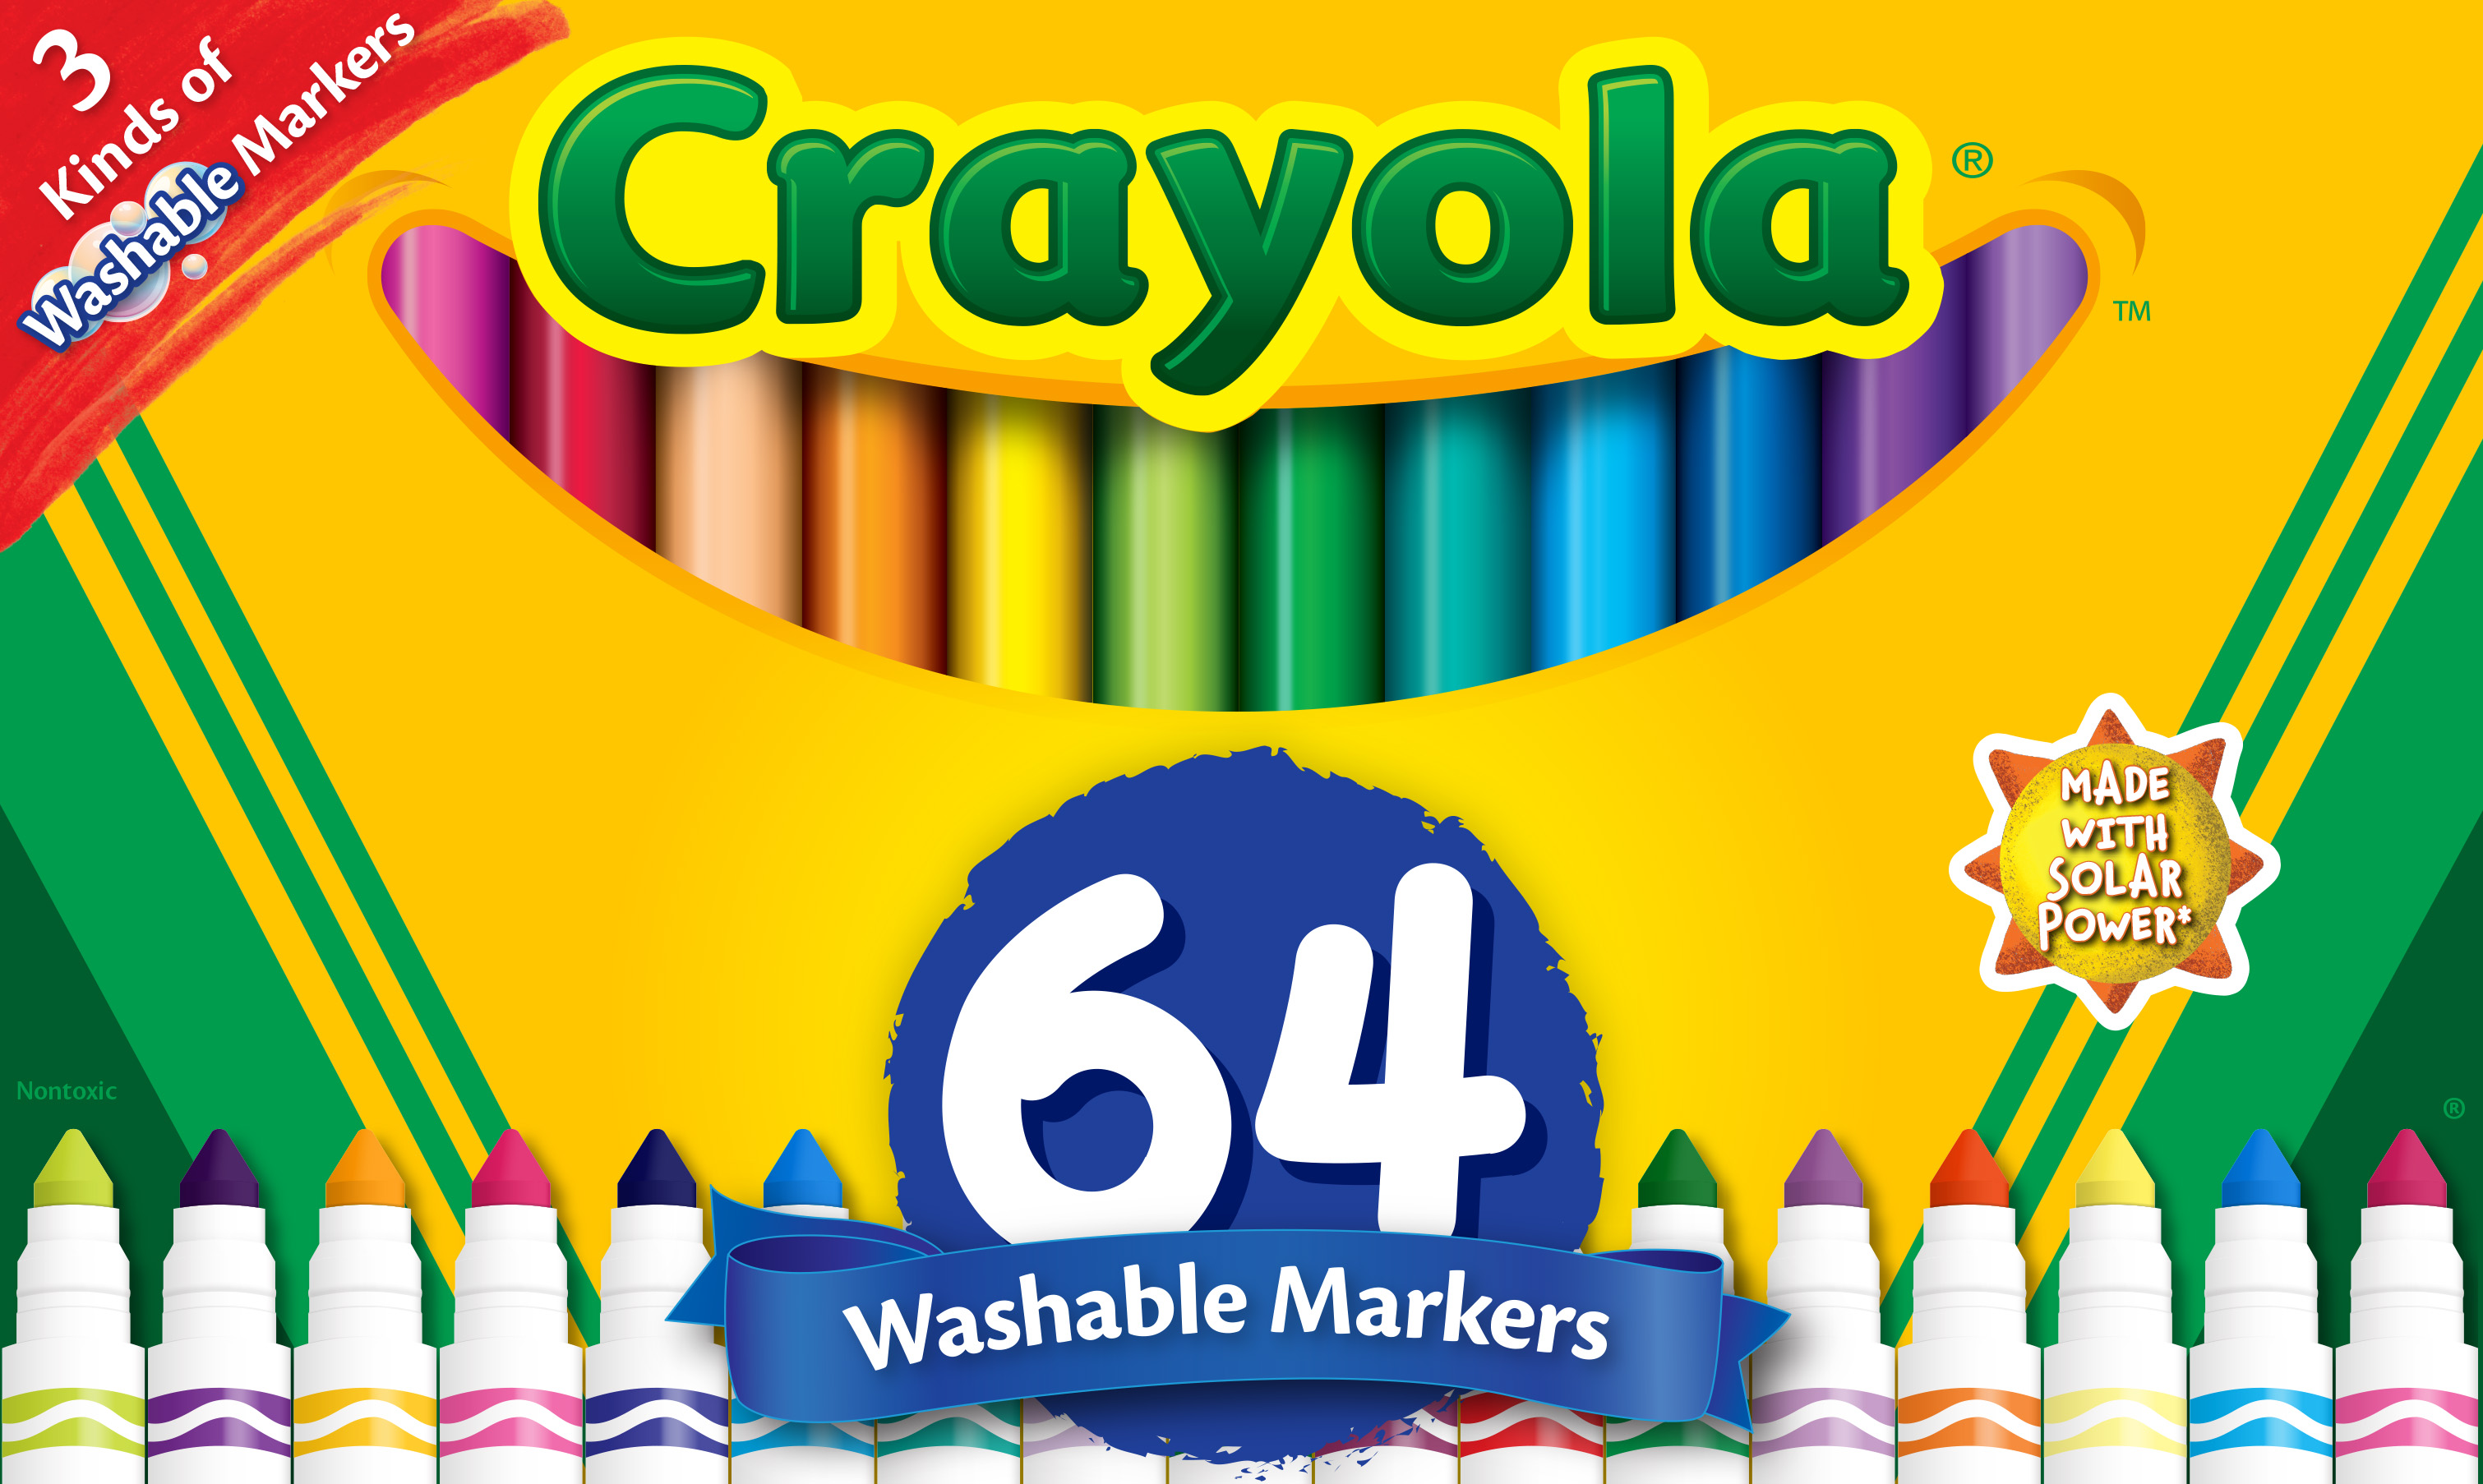 Crayola Washable Broad Line Markers with Gel FX Markers, 64 Ct, Art Supplies for Teens, Gifts - image 1 of 10